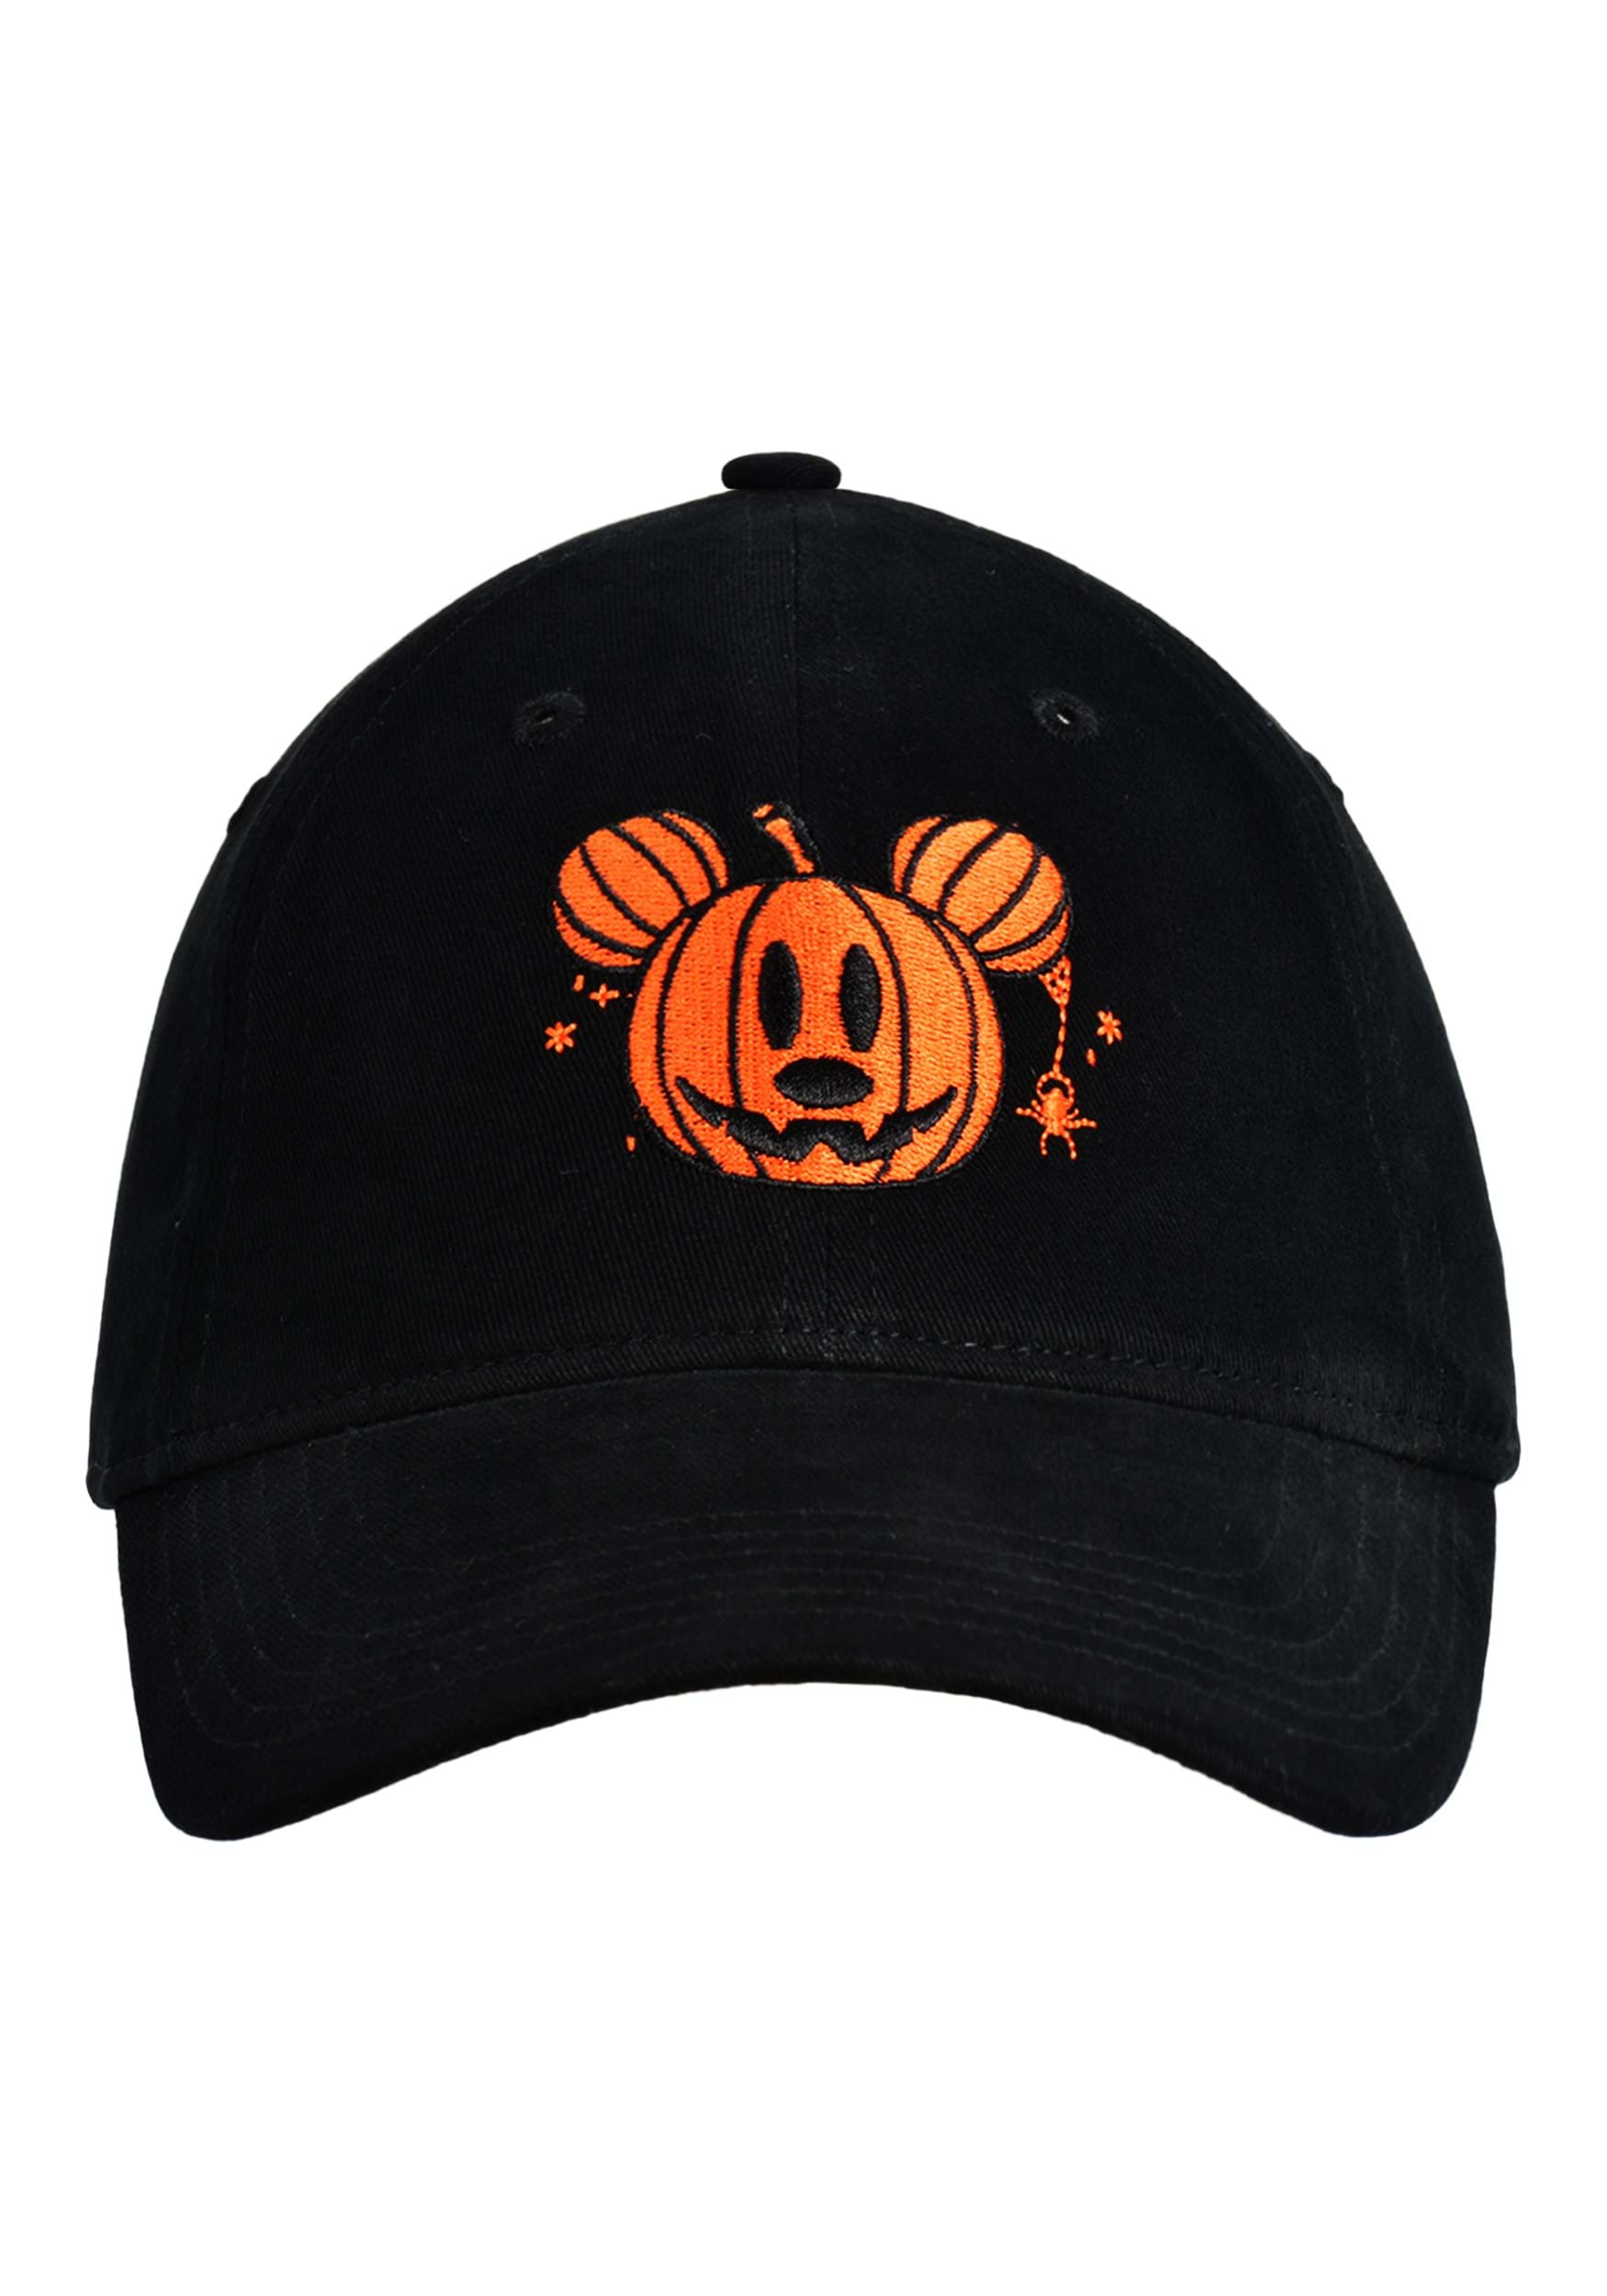 Photos - Fancy Dress Concept One Accessories Mickey Mouse Pumpkin Head Hat with Plaid Underbrim 